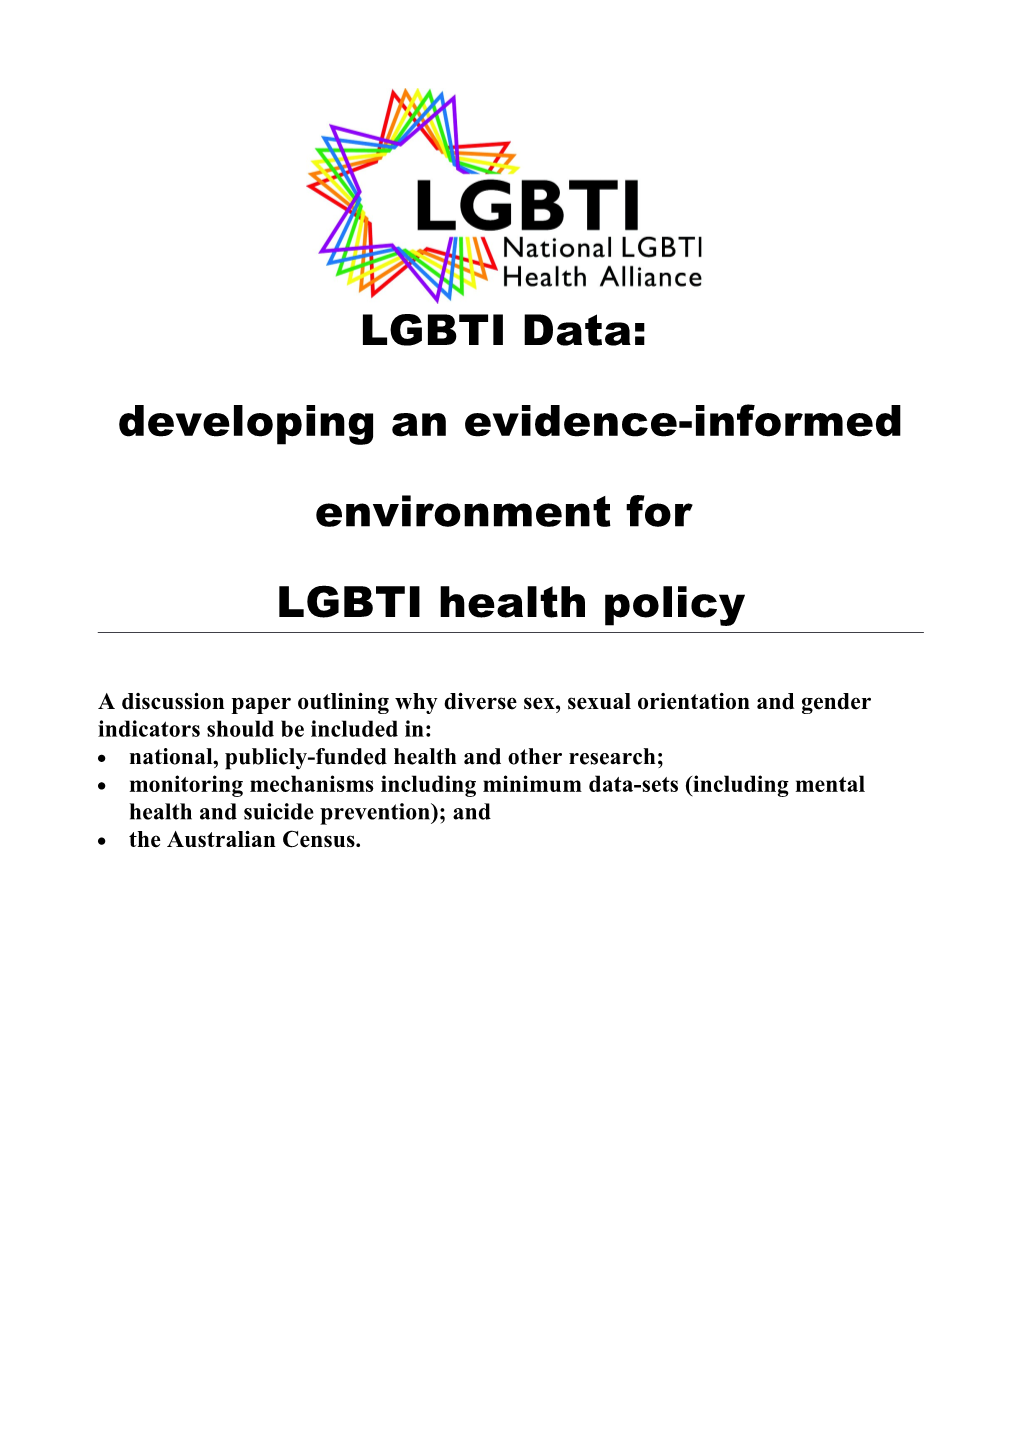 Developing an Evidence-Informed Environment for LGBTI Health Policy